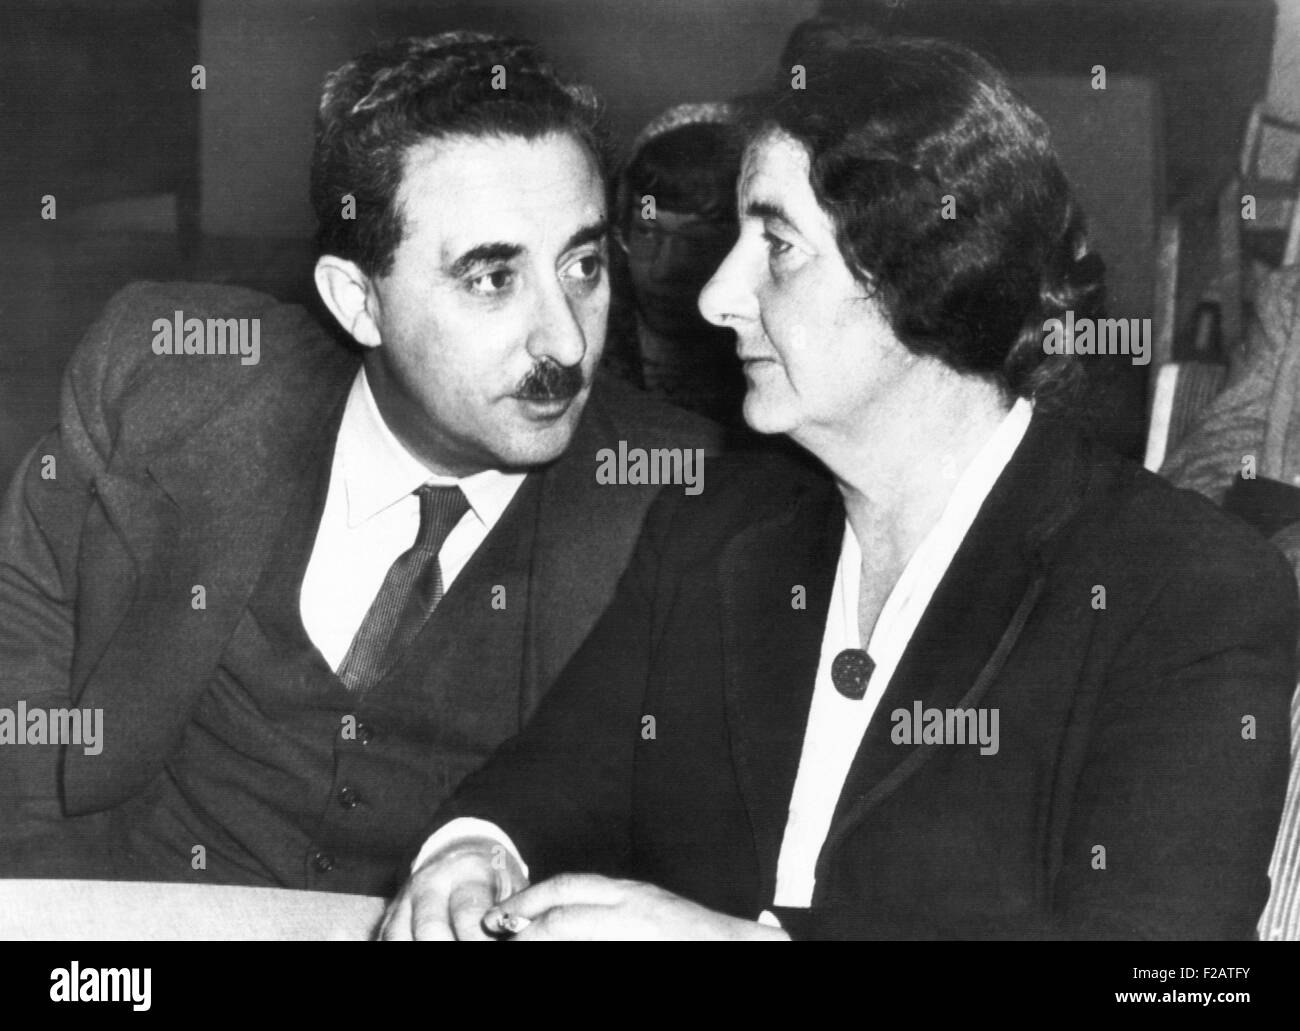 Golda Meyerson (Meir) with Moshe Sharett at the United Nations in New York in 1948. Sharett was Israel's first Minister of Foreign Affairs. (CSU 2015 11 1645) Stock Photo